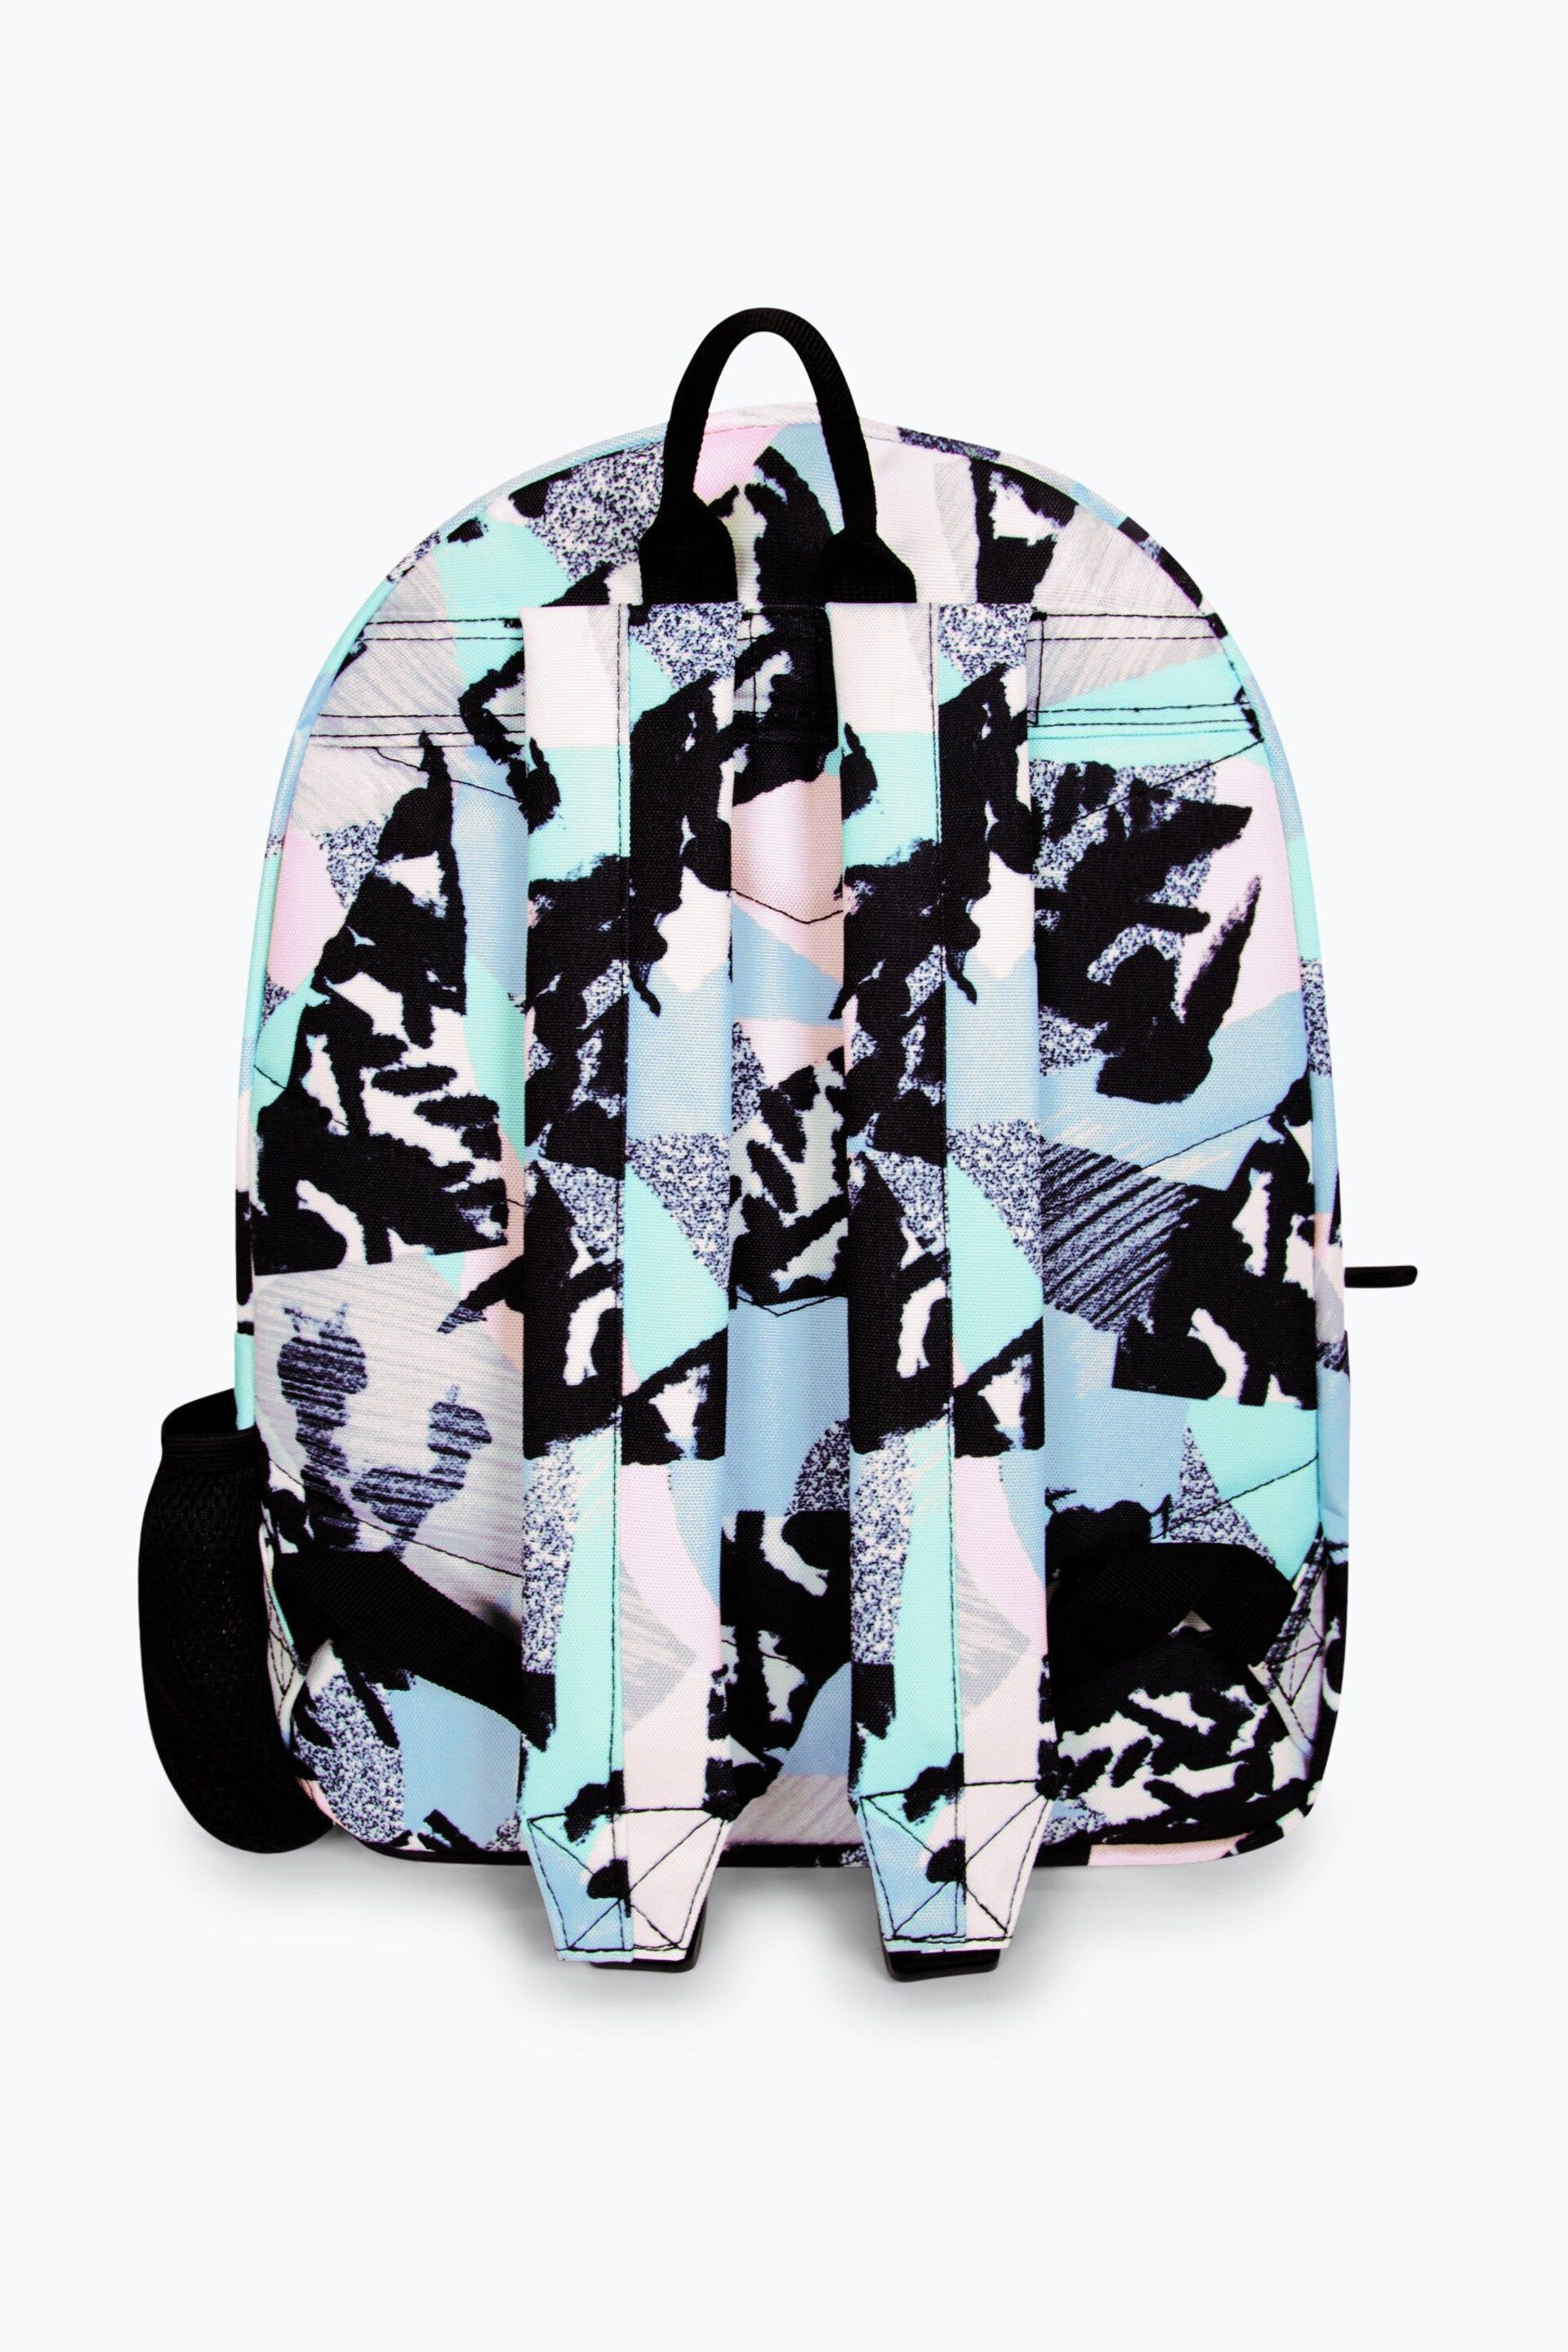 Hype. Multi Pastel Abstract Backpack - Image 4 of 10